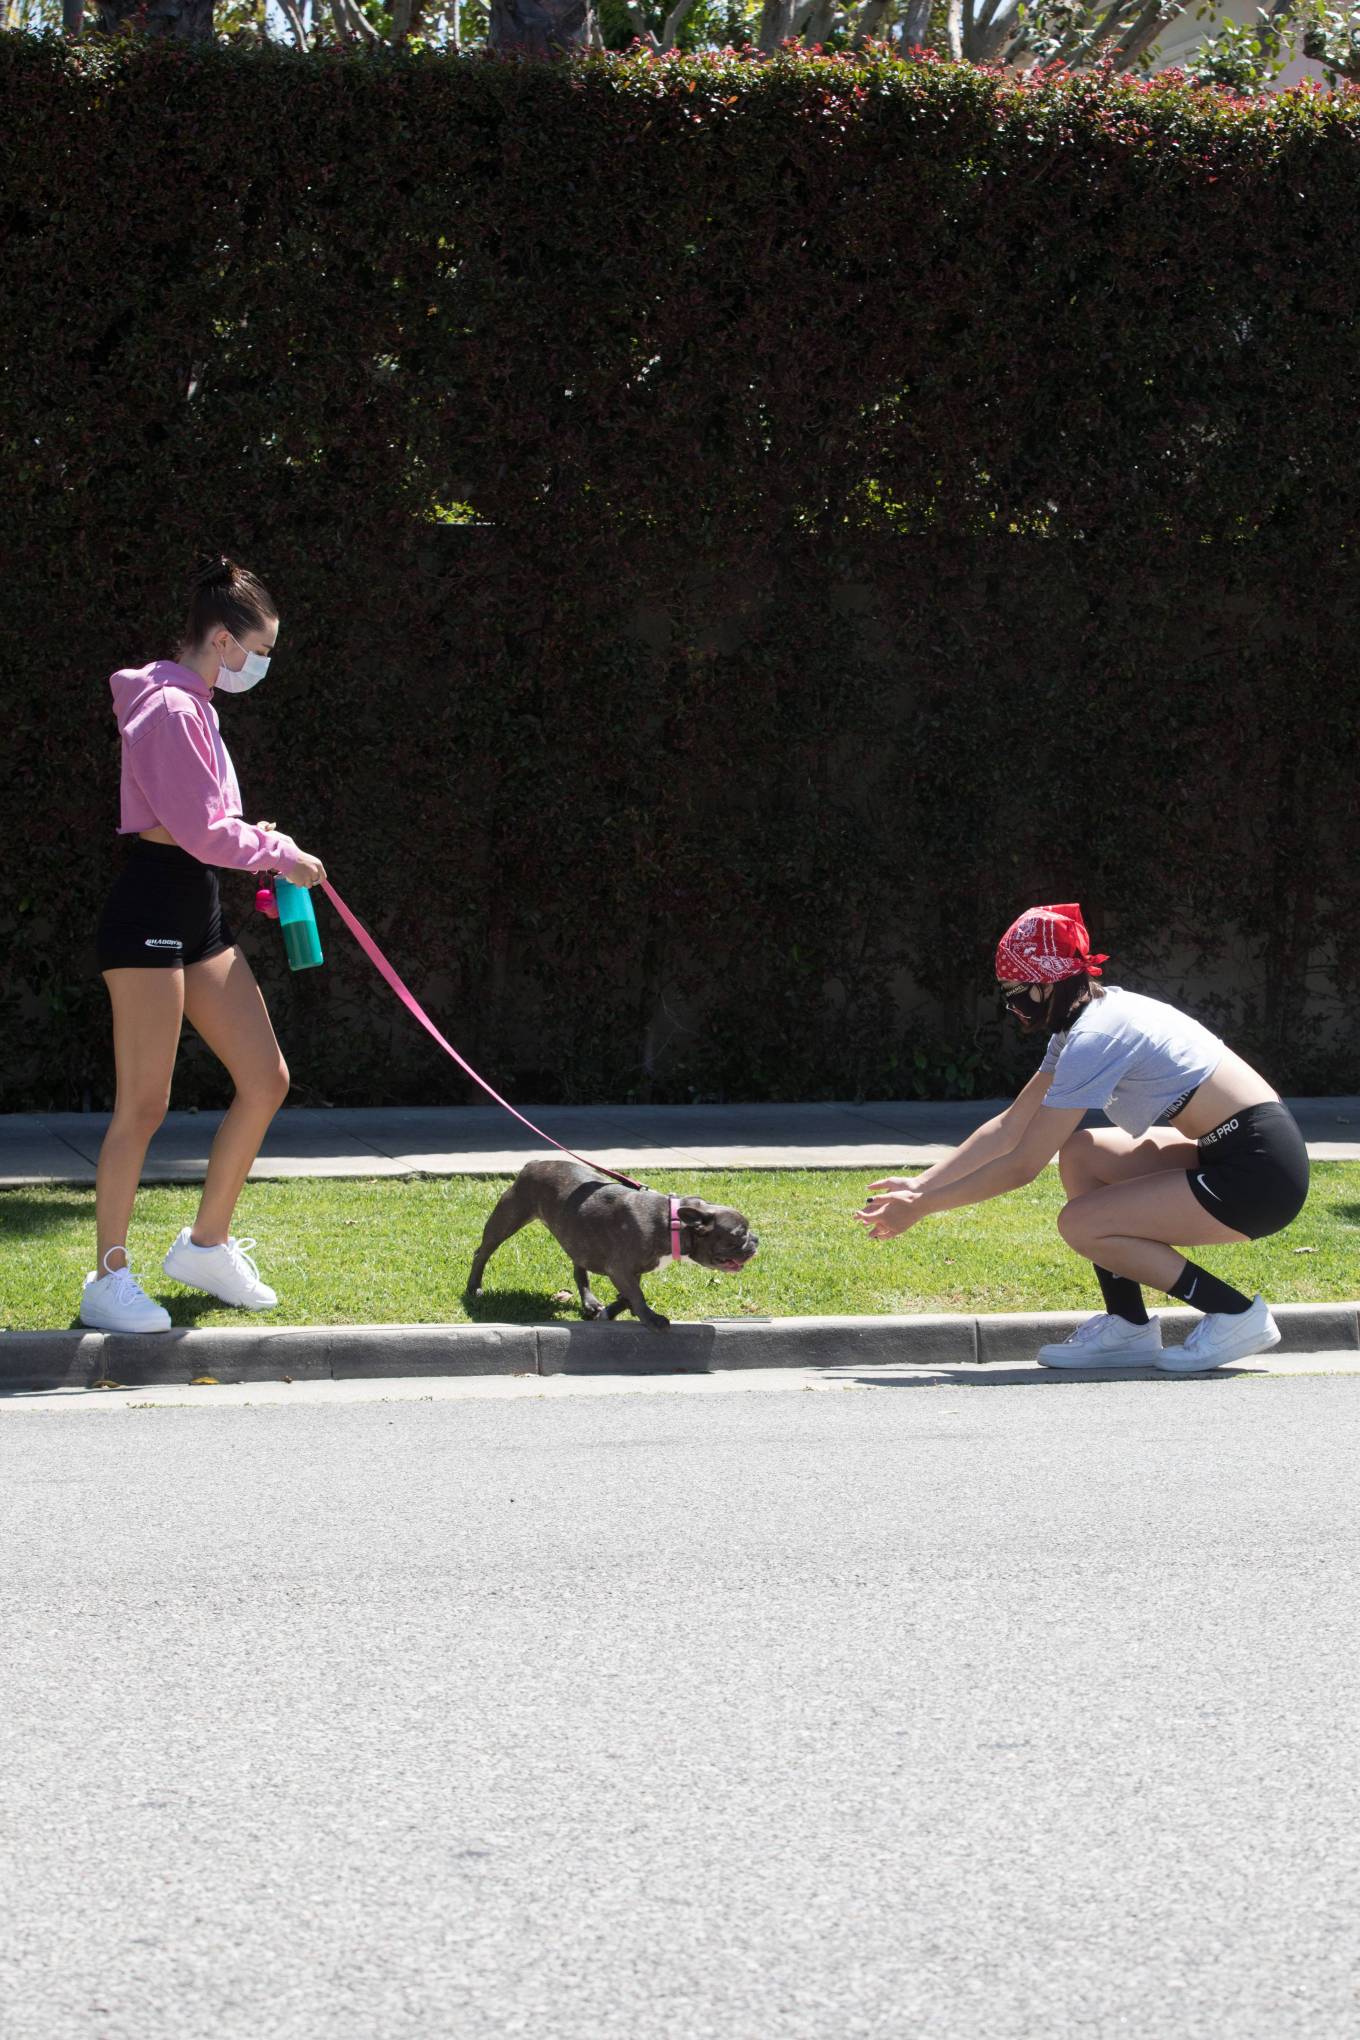 Delilah Belle and Amelia Gray Hamlin â€“ Out for a dog walk in Beverly Hills